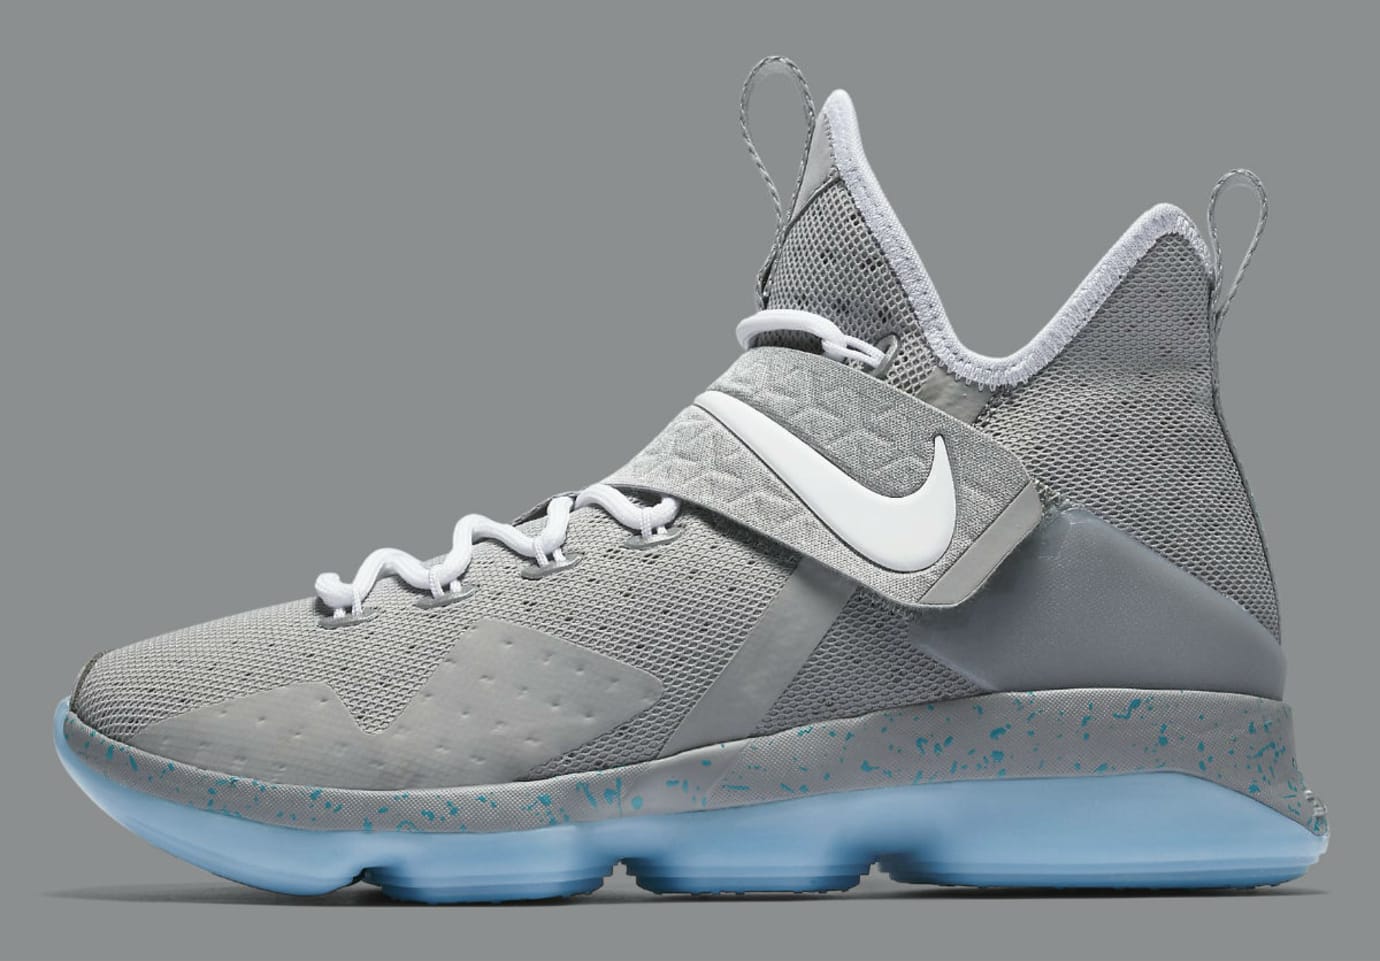 Nike LeBron 14 Mag McFly Release Date Profile 852405-005